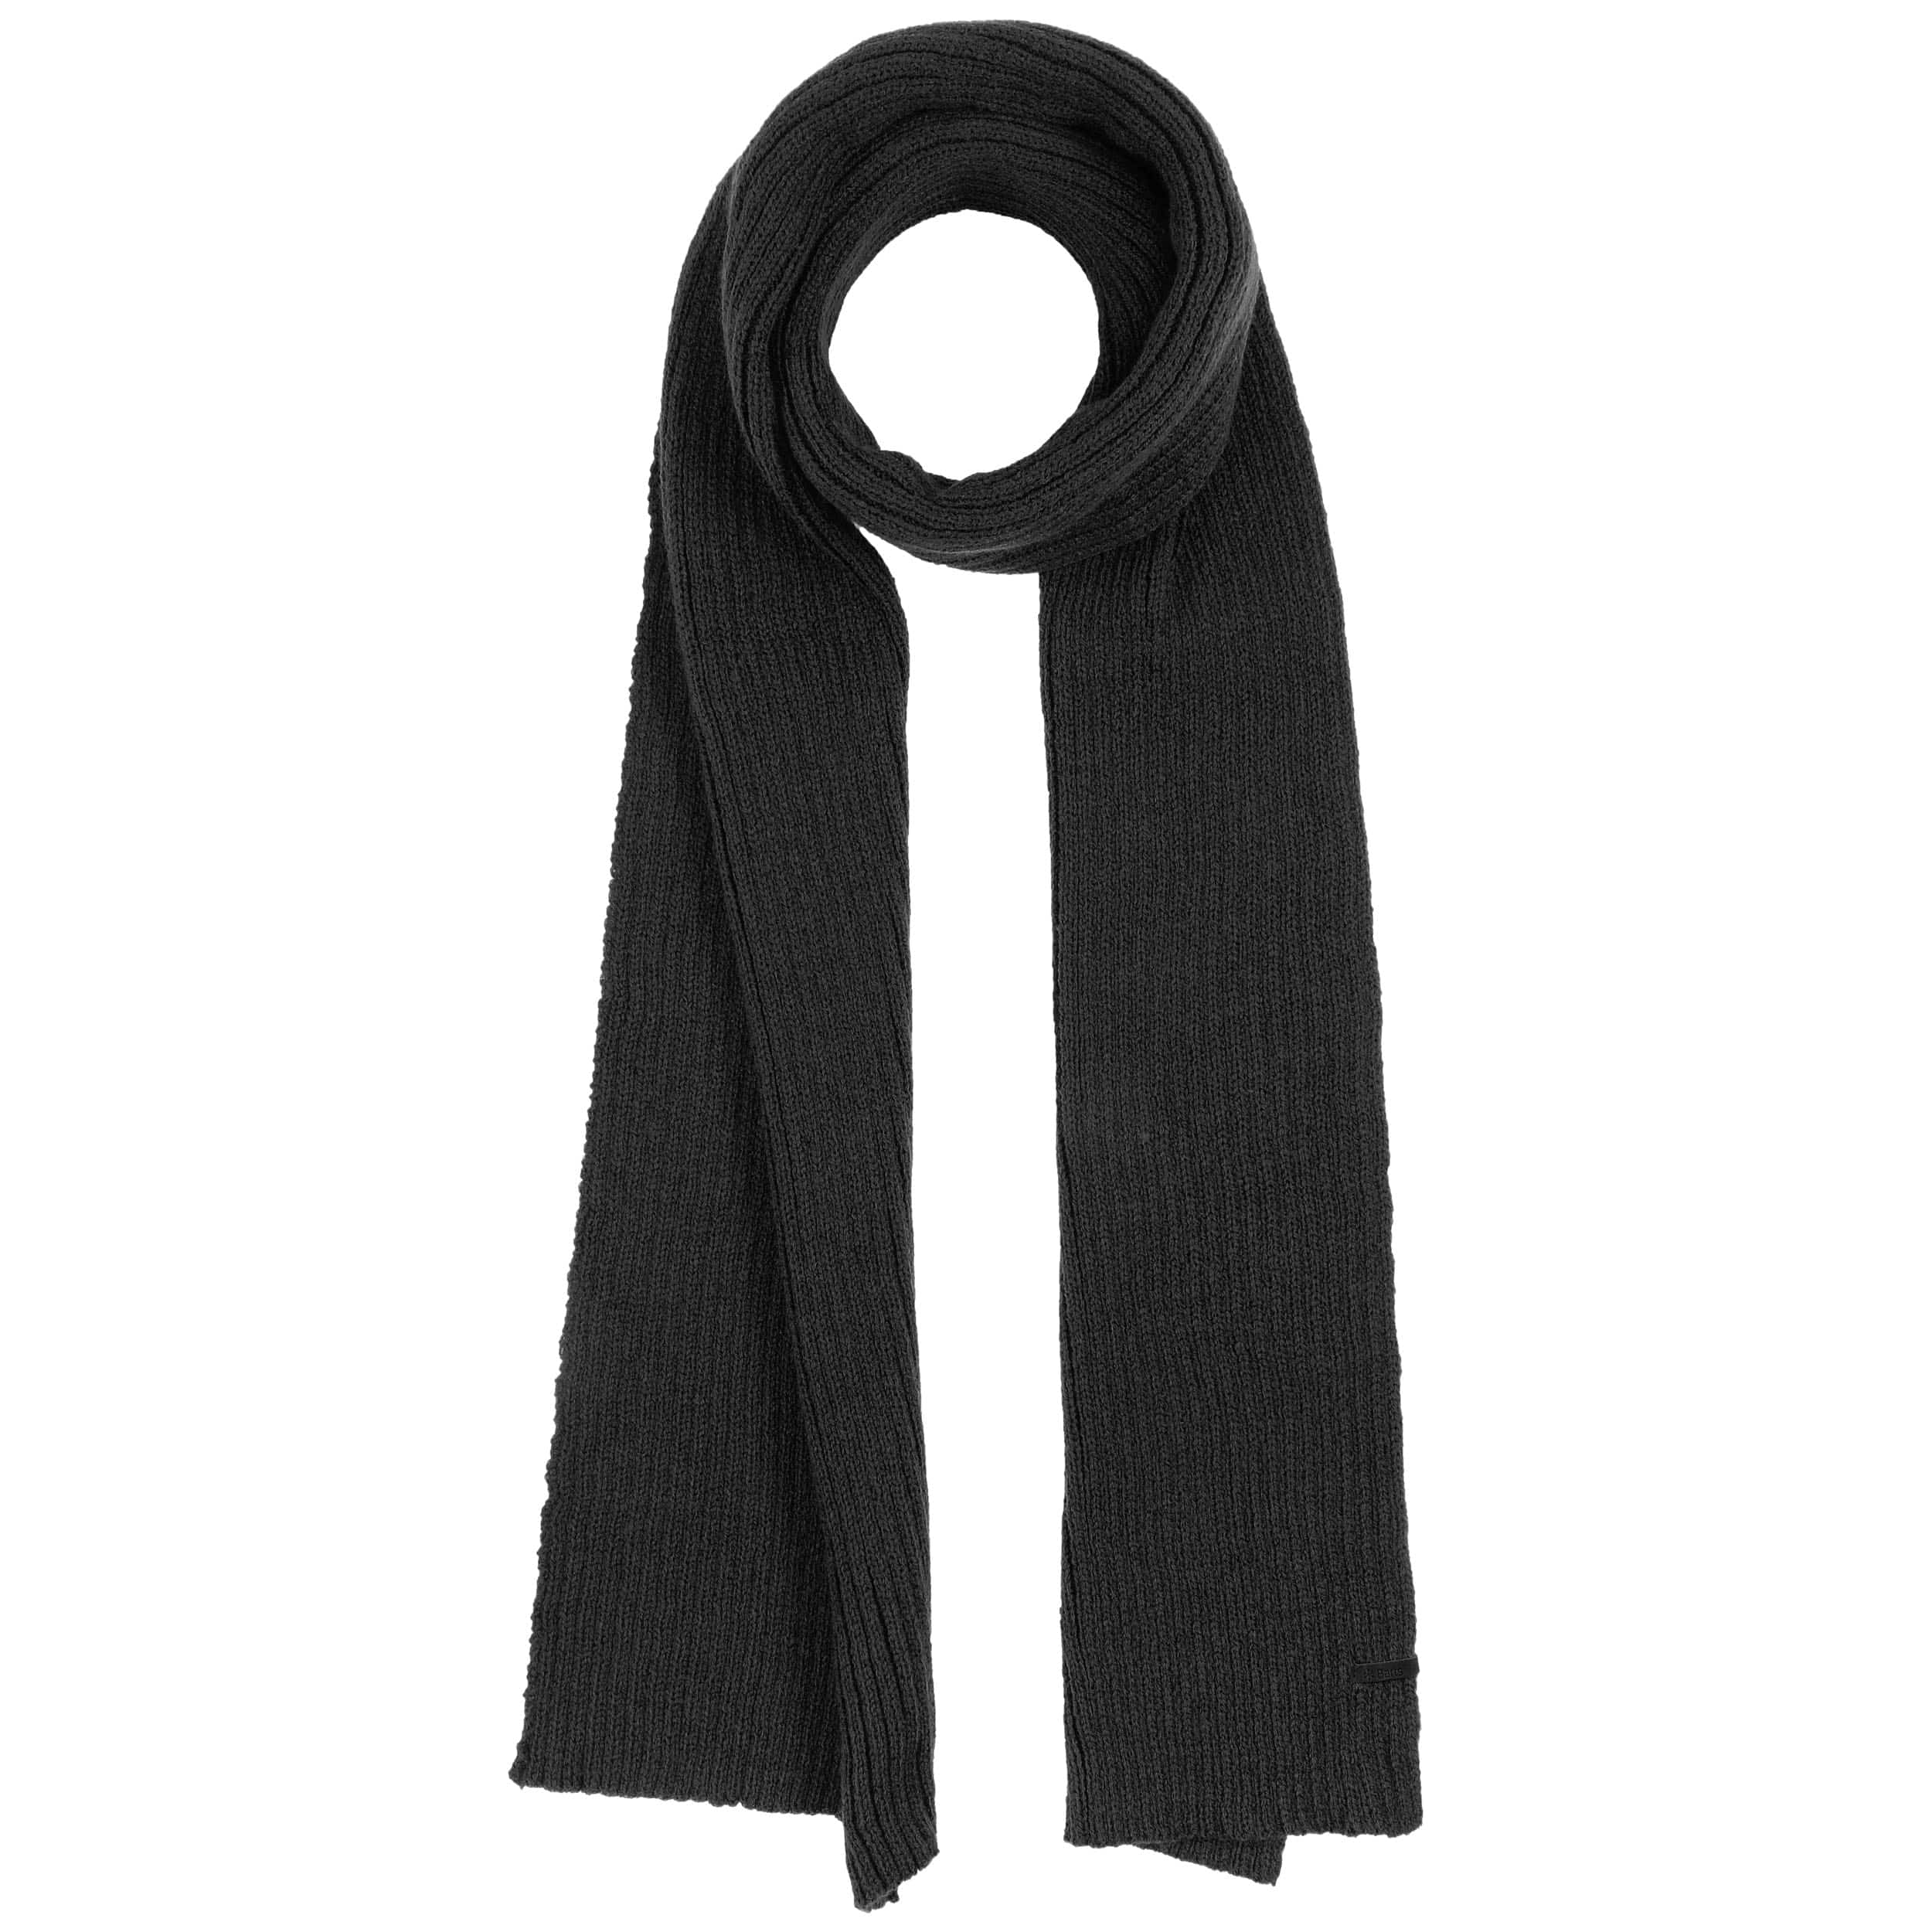 Wilbert Scarf by Barts - 21,95